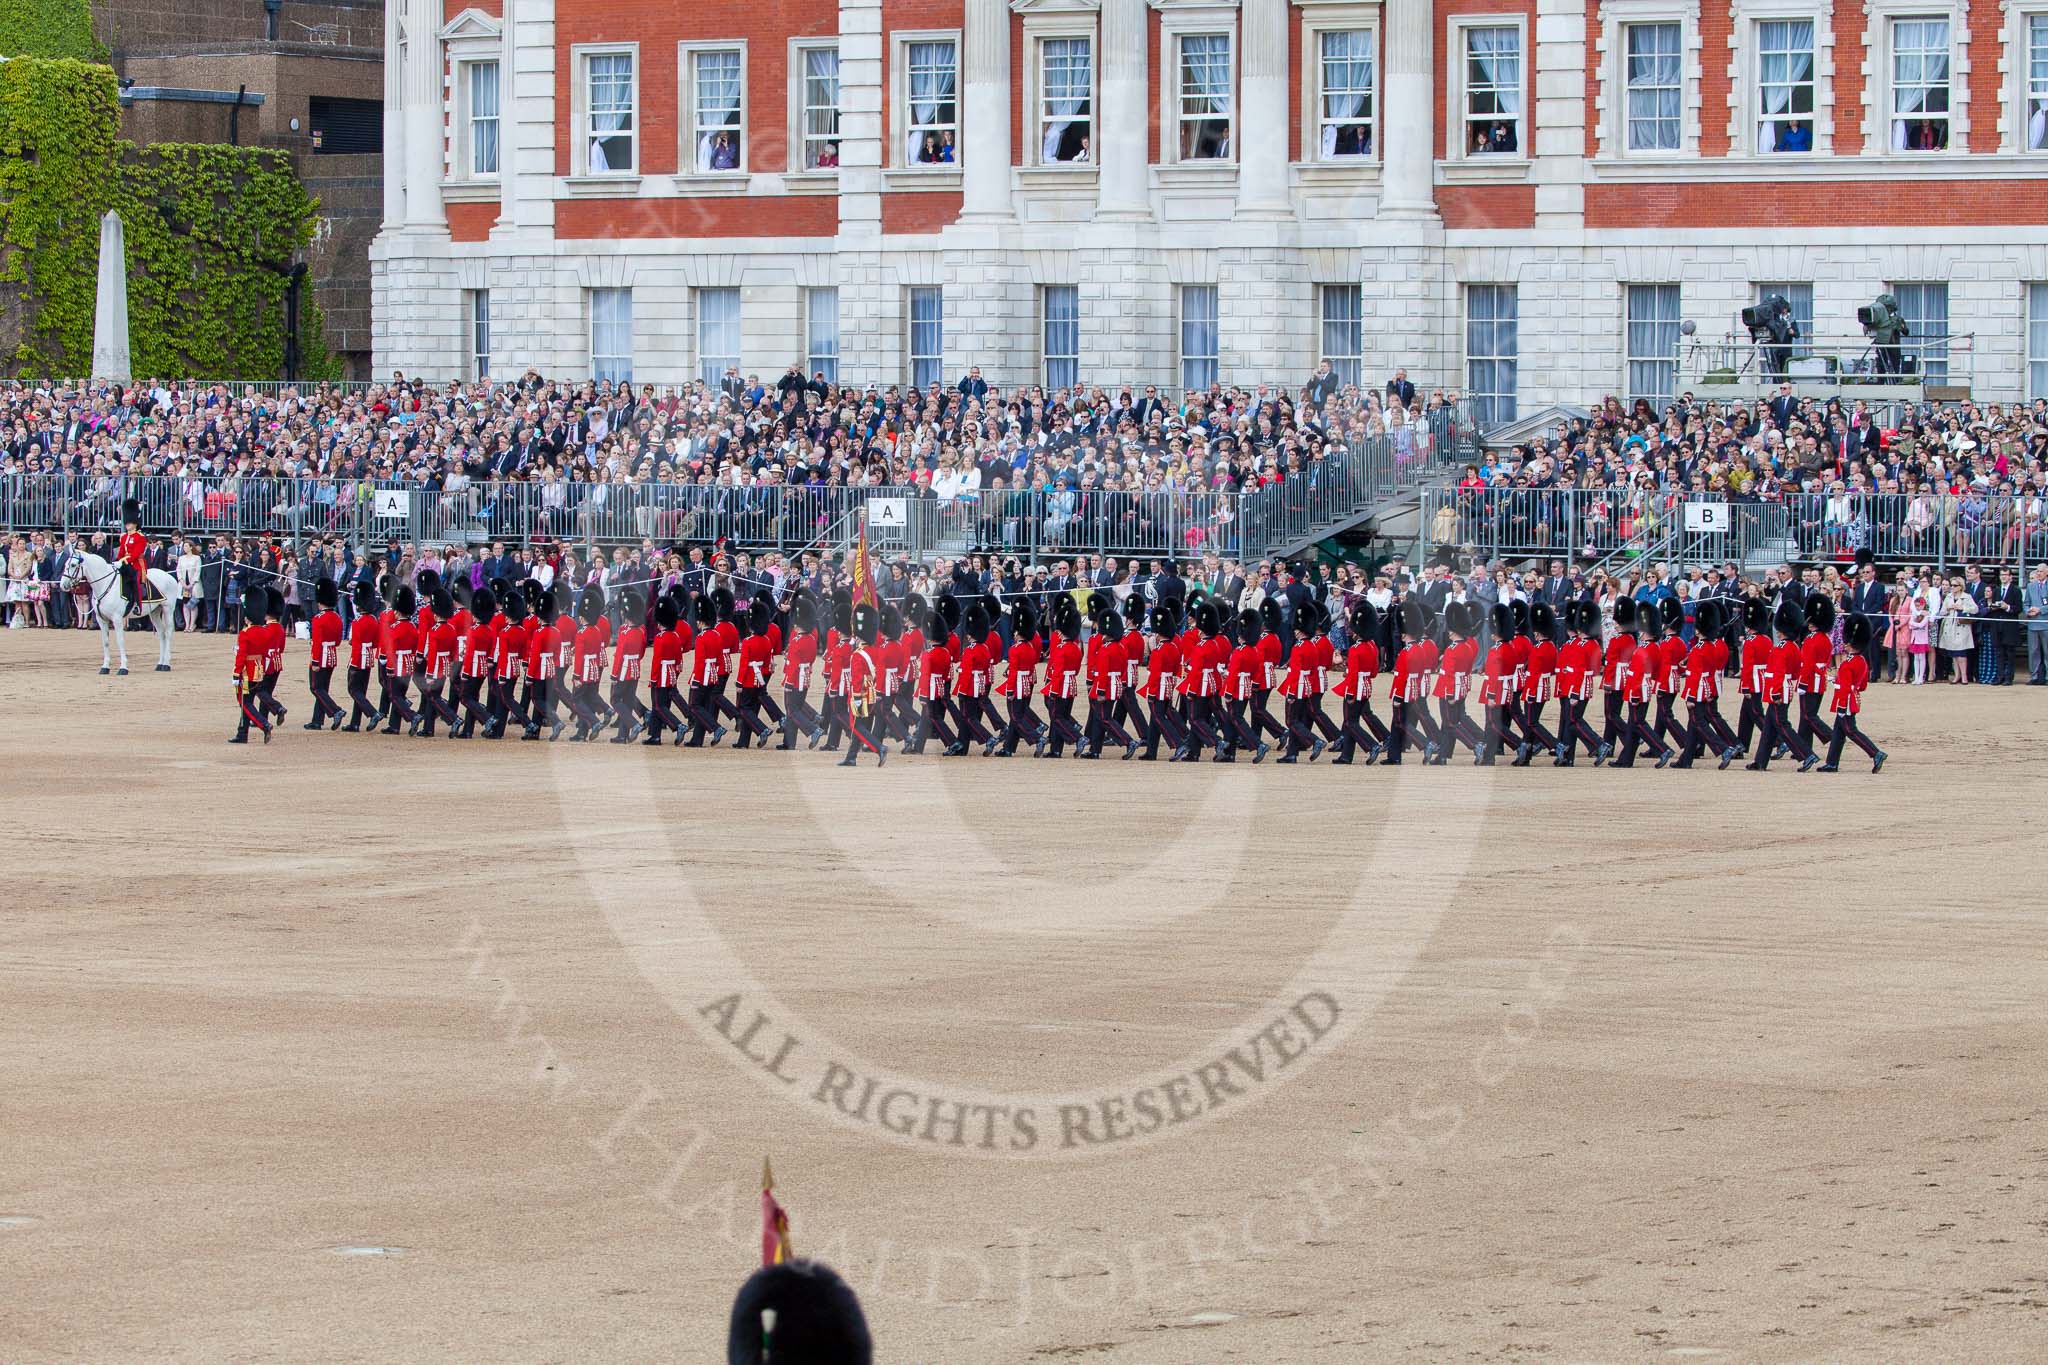 Trooping the Colour 2013: The Escort Tto the Colour is marching towards No.6 Guard, to begin the trooping the Colour through the ranks. Image #485, 15 June 2013 11:24 Horse Guards Parade, London, UK